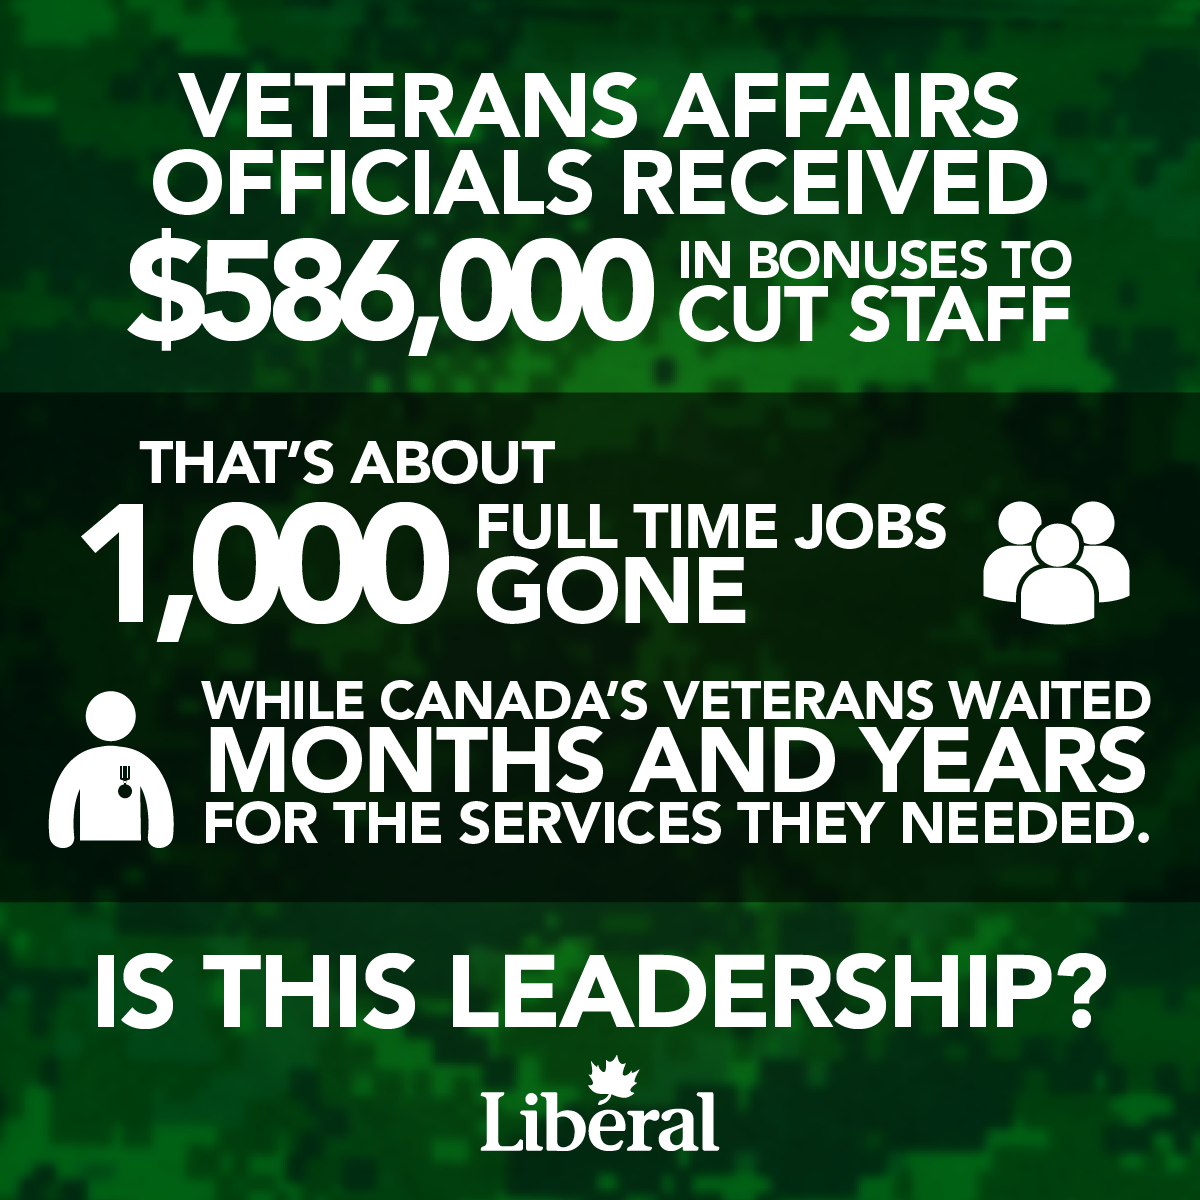 Veterans Affairs officials received $586,000 in bonuses to cut staff. That’s about 1000 full time jobs gone. While Canada’s Veterans waited months and years for the services they needed. Is this Leadership?